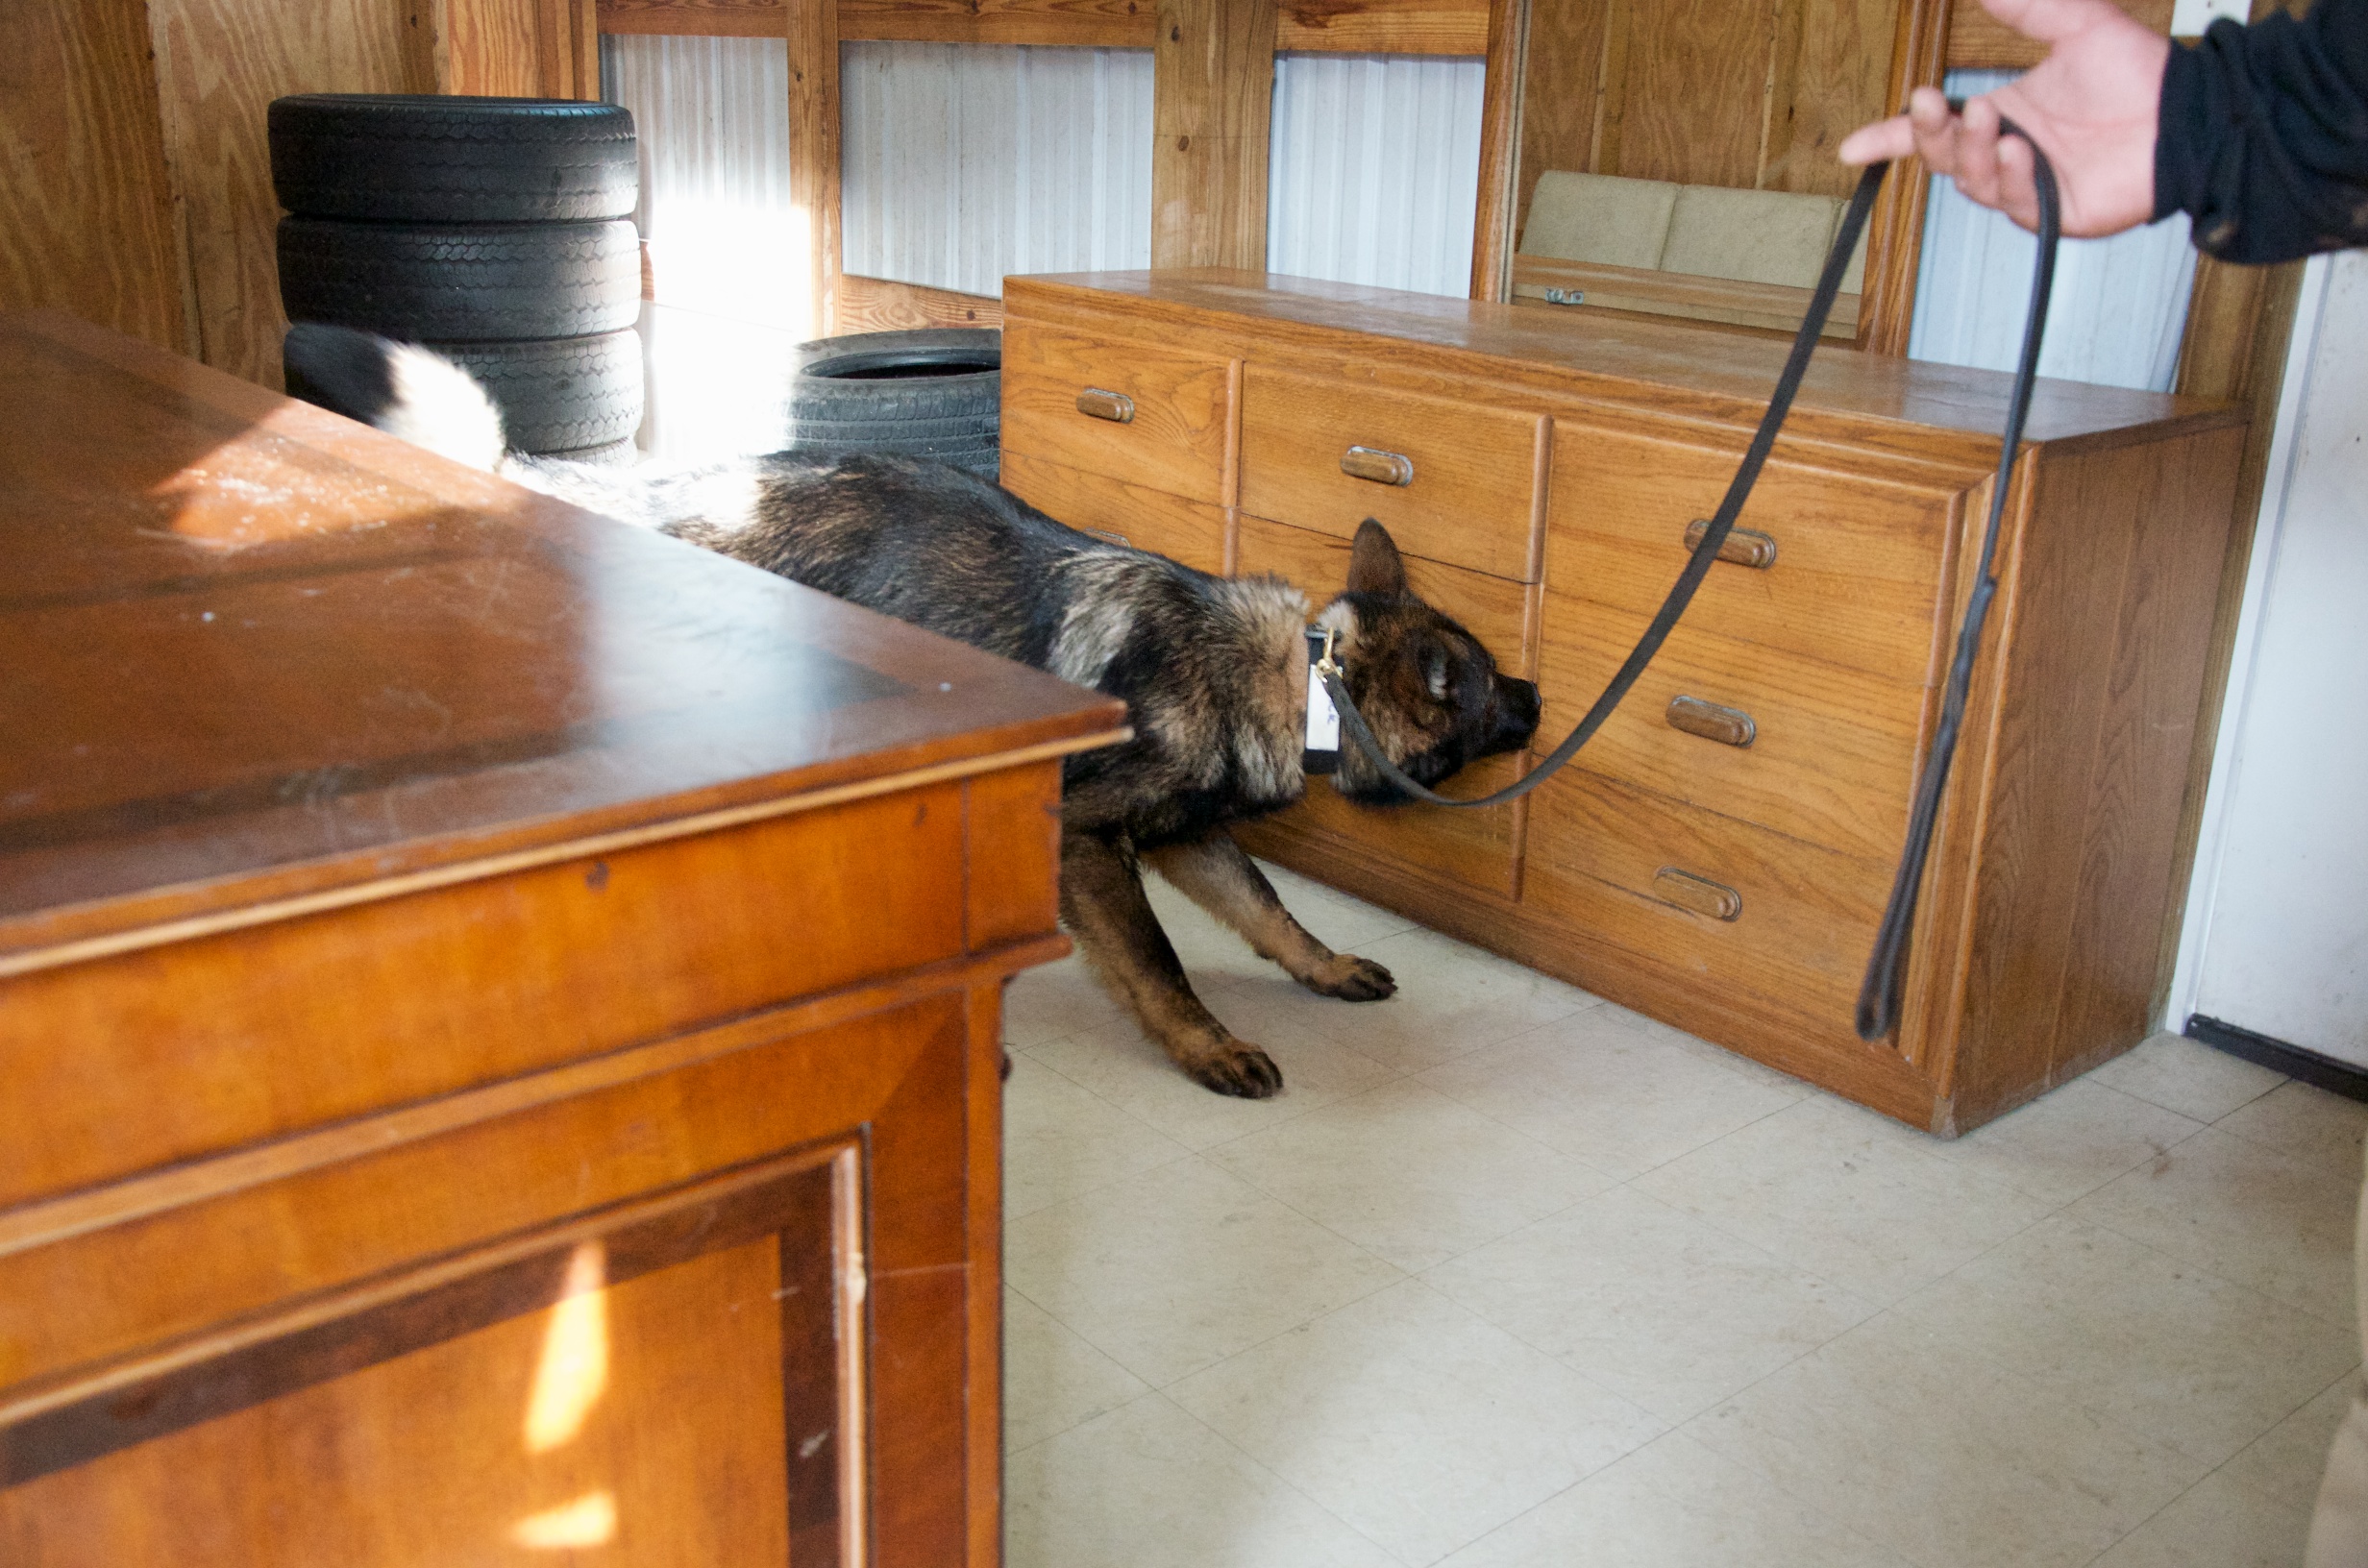 A drug detection dog inspecting a chest of drawers